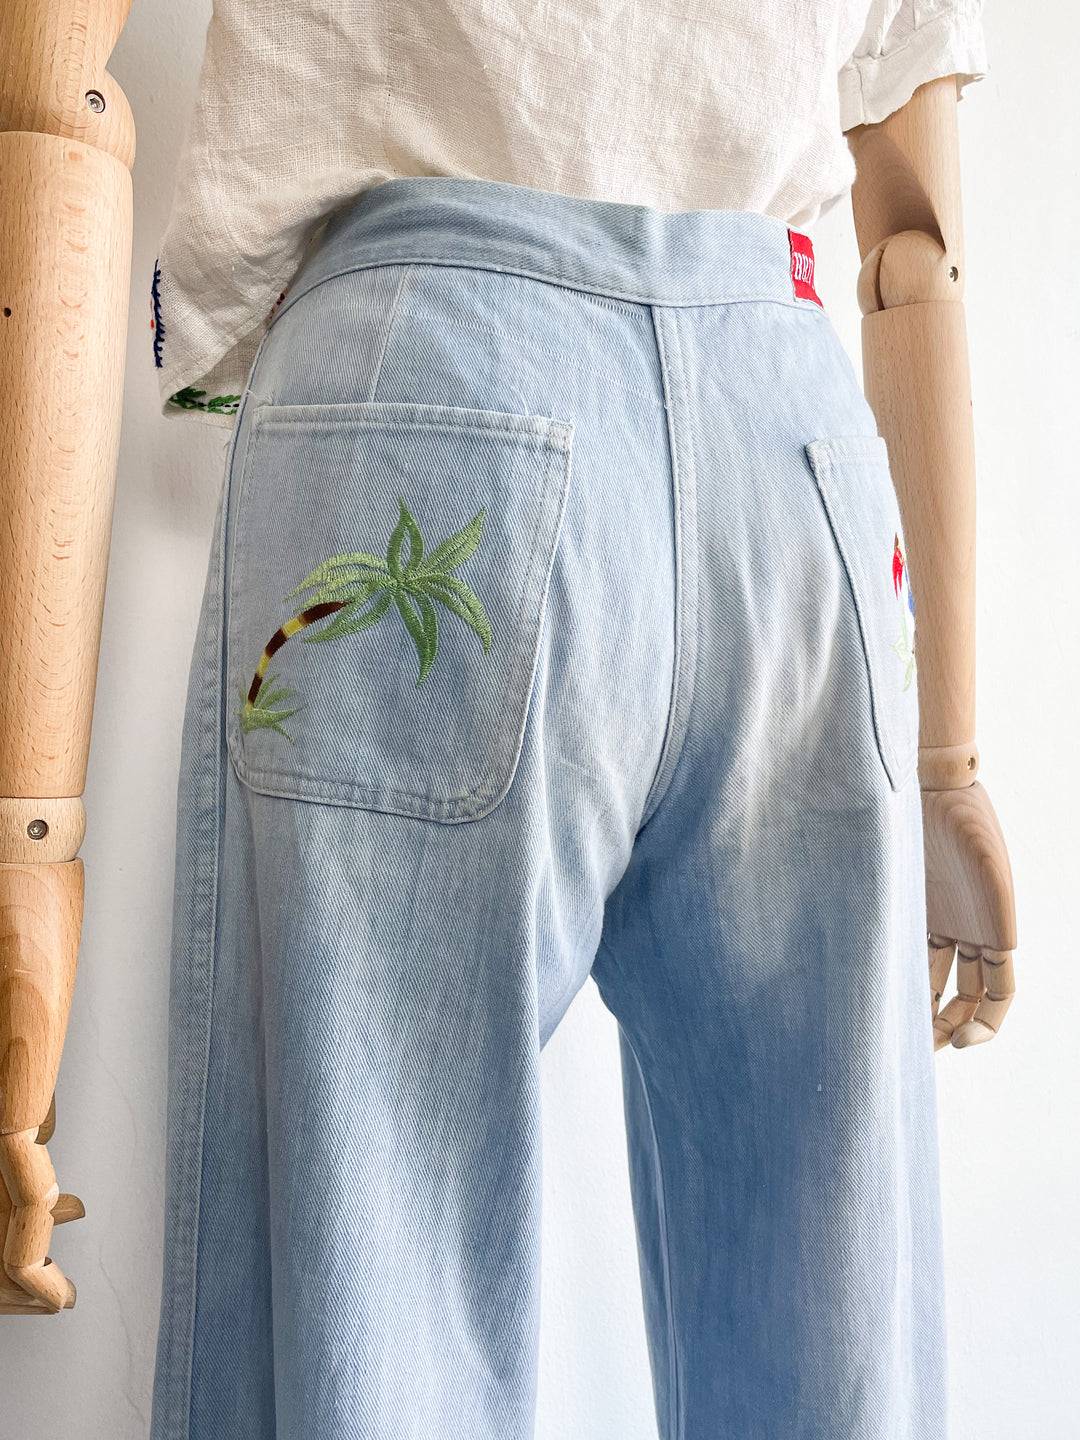 The Parrot 70s Jeans